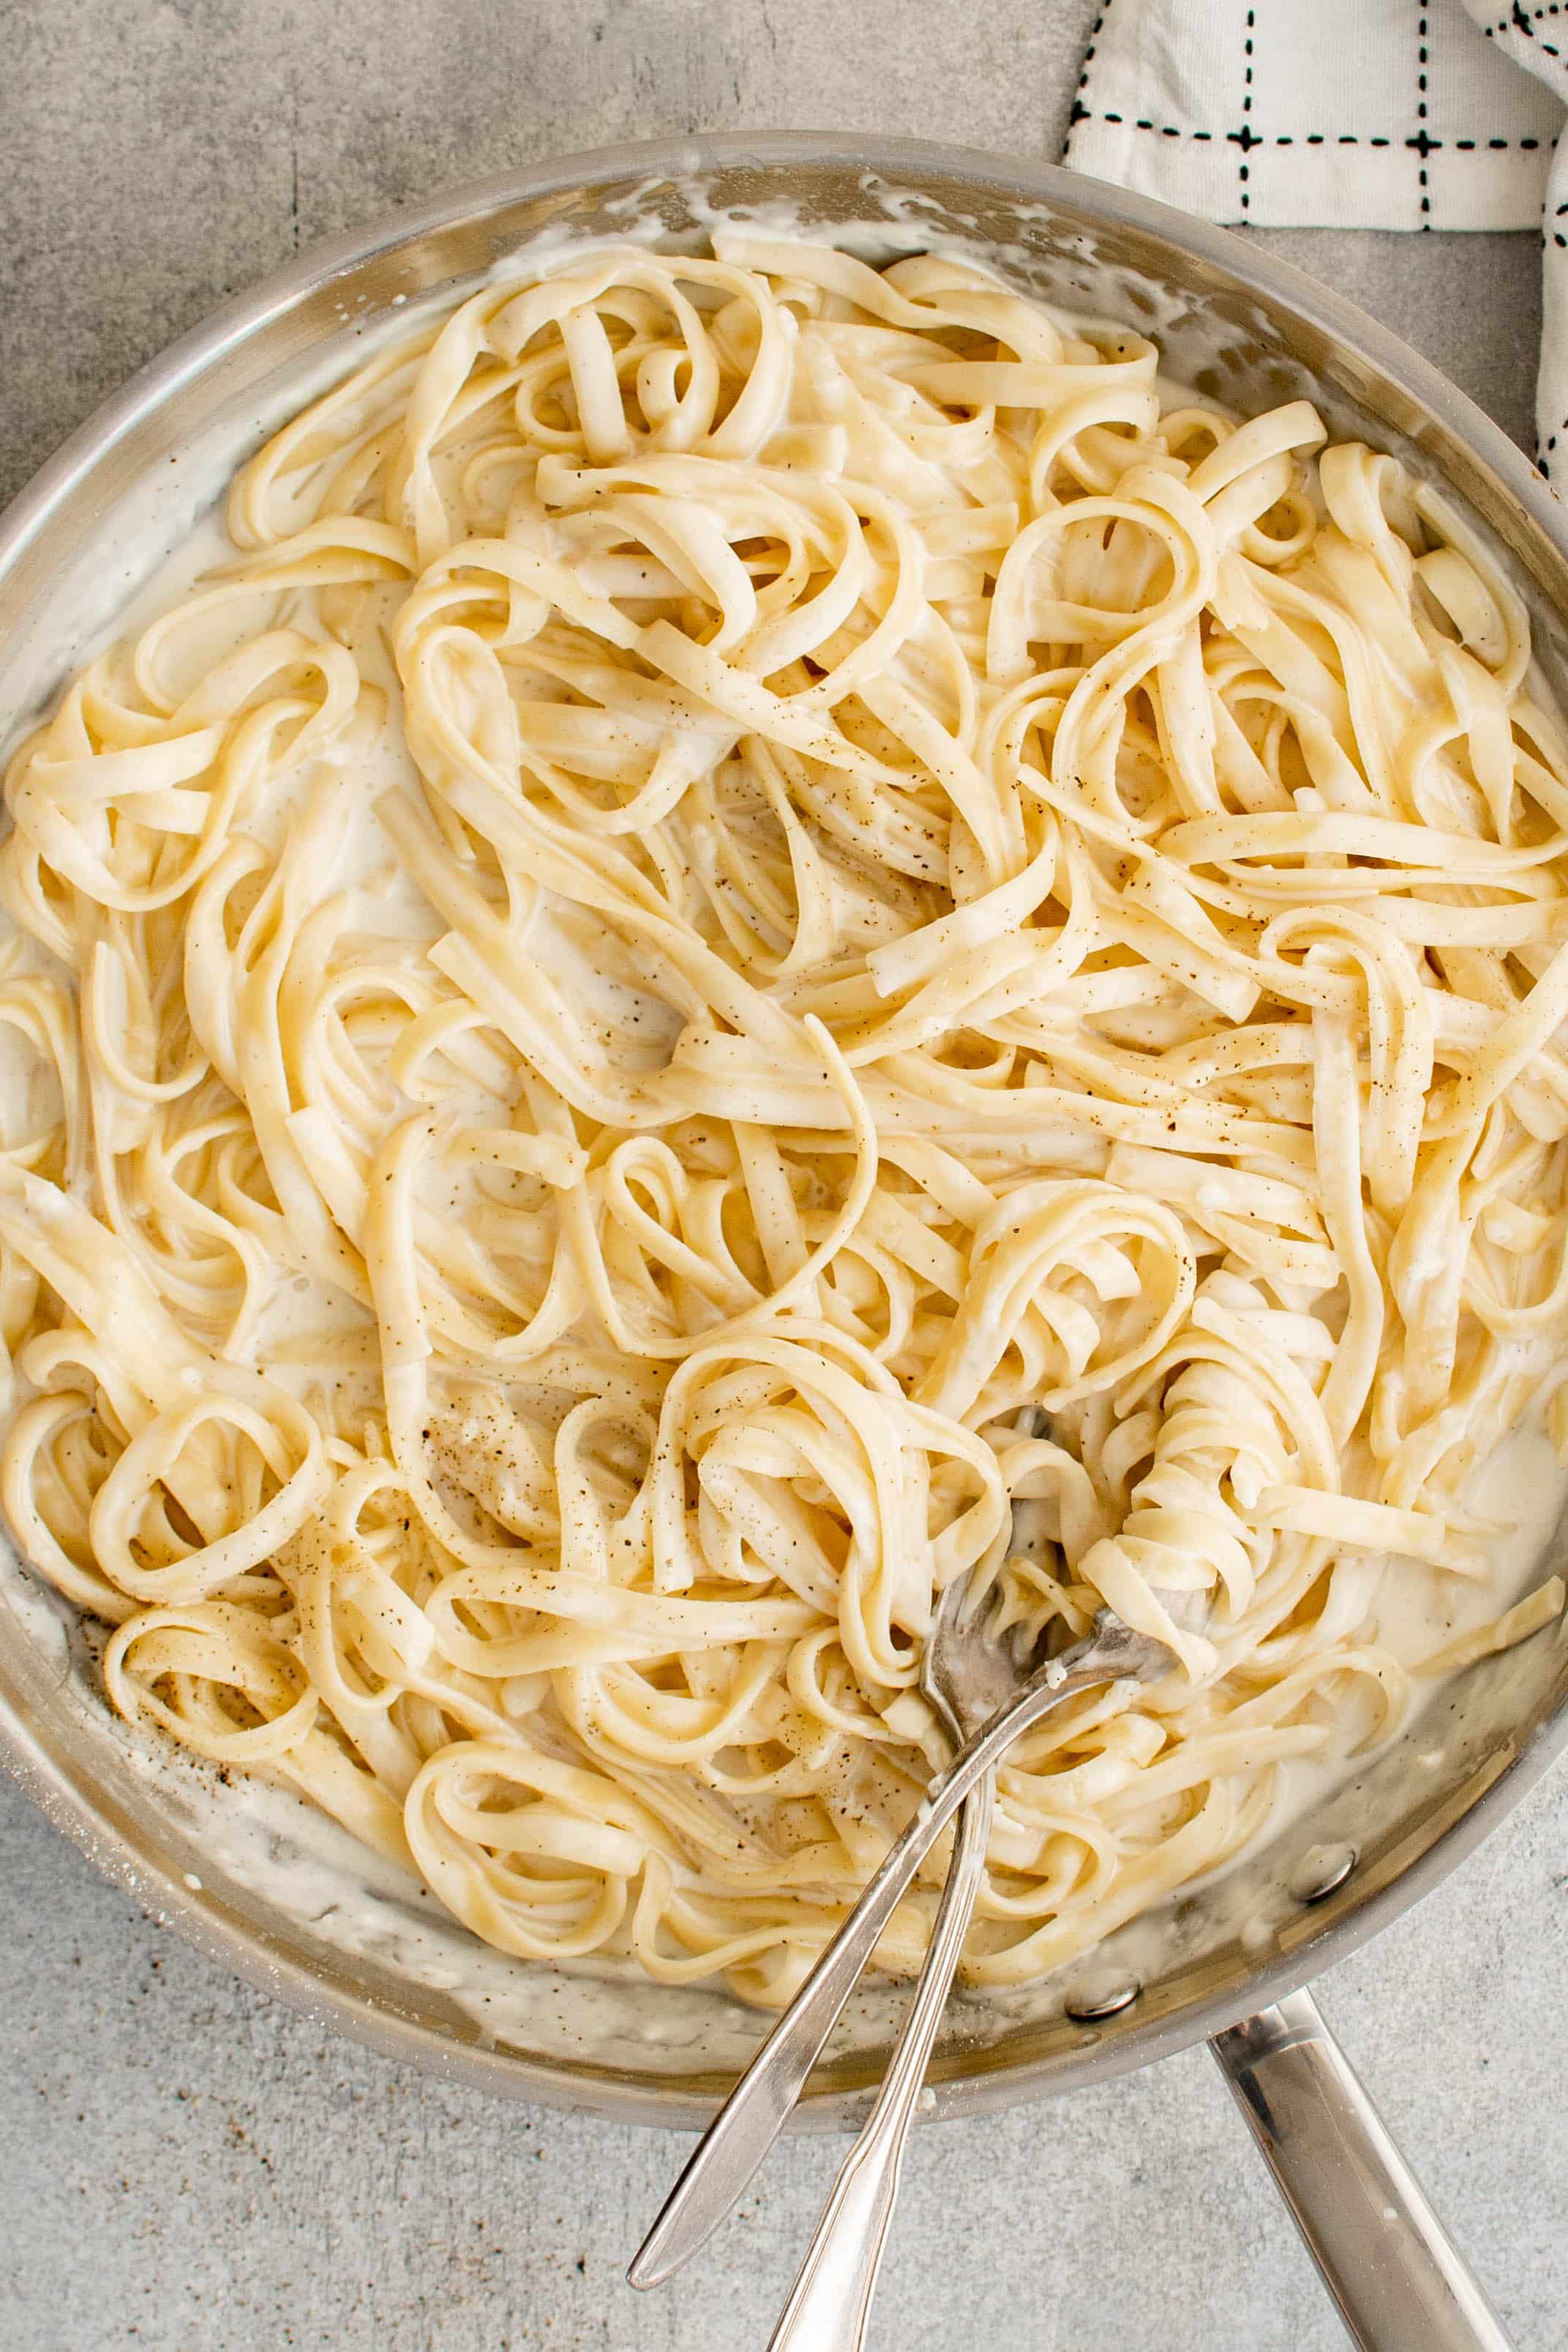 Large stainless steel skillet filled with cooked fettuccine noodles tossed in alfredo sauce.